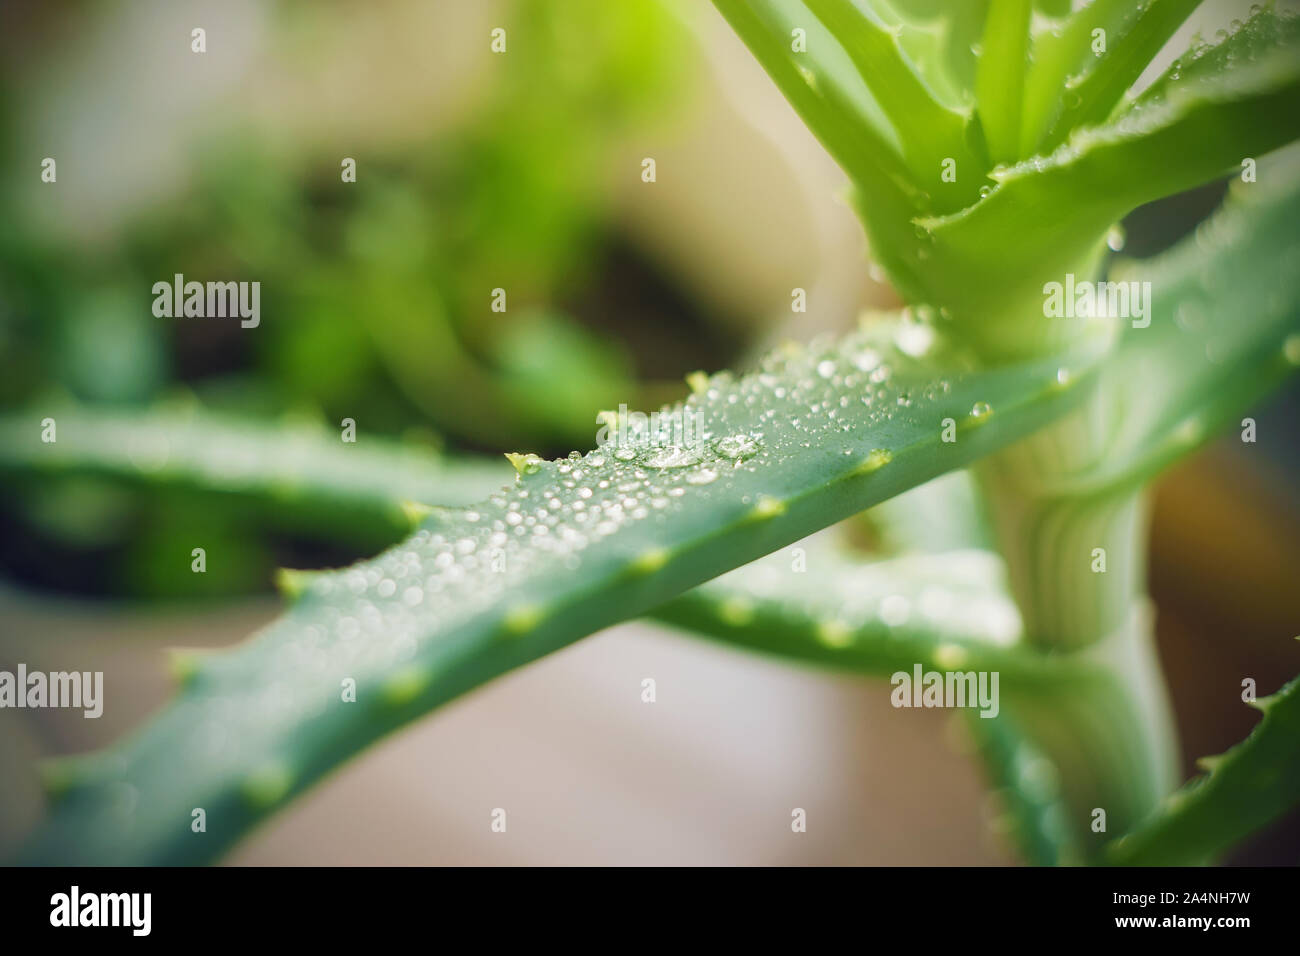 The juicy thick leaf of the growing young aloe Vera is covered with iridescent dew drops that are illuminated by sunlight. Stock Photo